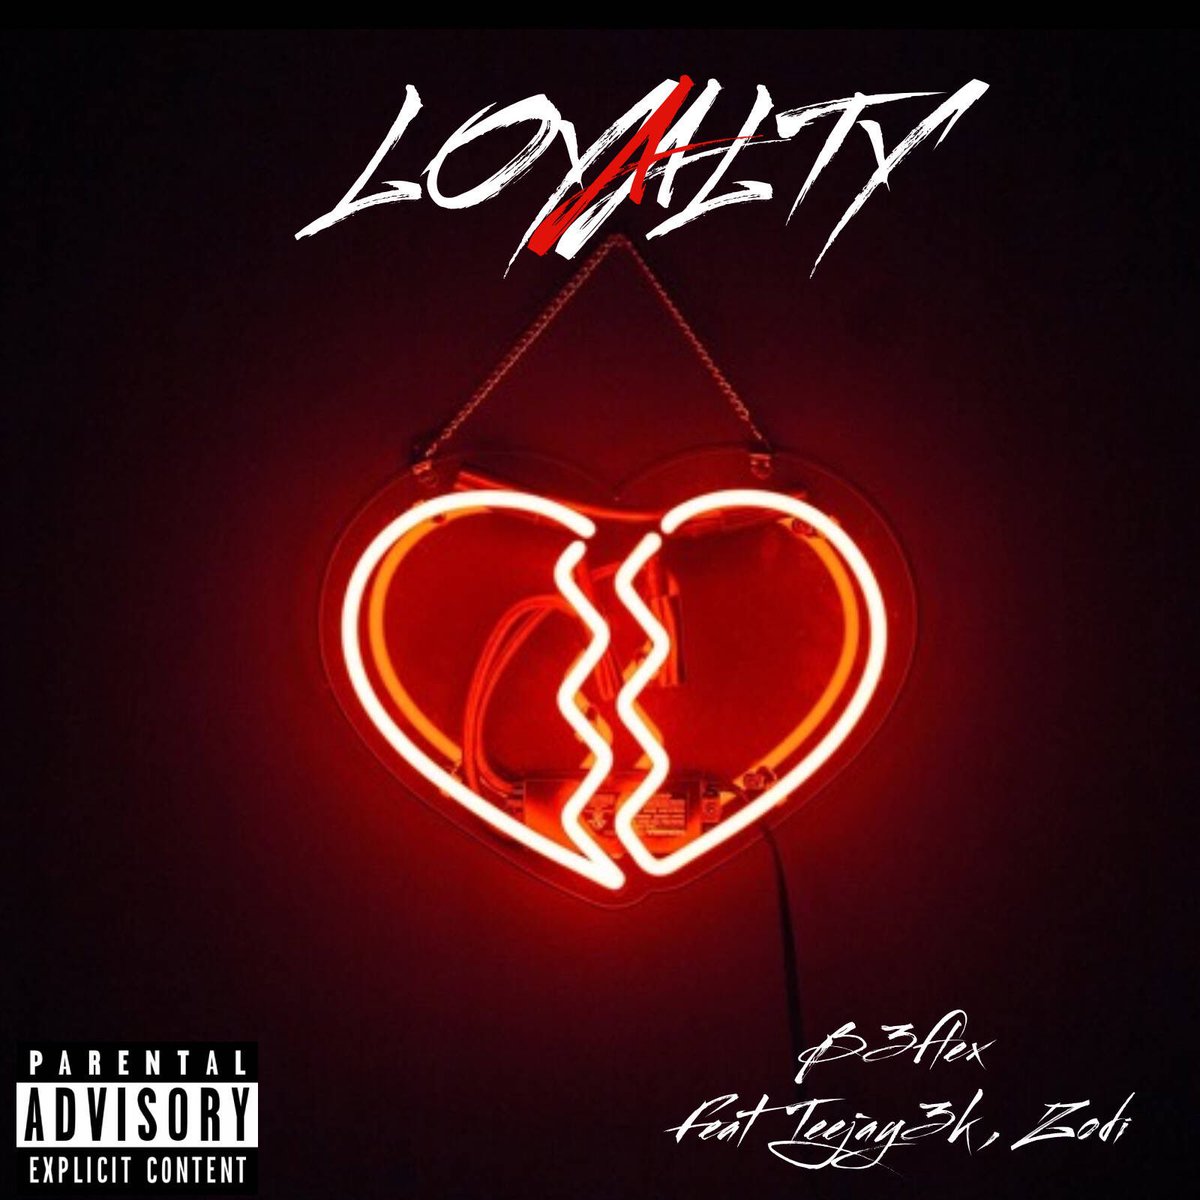 Loyalty By B3 Flex feat @Teejay_3k Out Now Available On All Platforms Click the Link Below And Steam it Right now 🔥🔥🔥🔥👇🏾👇🏾 👇🏾👇🏾open.spotify.com/album/6qexEwKB… #hiphop #NewMusicFriday #hiphopblogs #TheSource #AppleMusic #Spotify #tidal #AppStore #ArtistOnTwitter #BlacklivesStillMatter